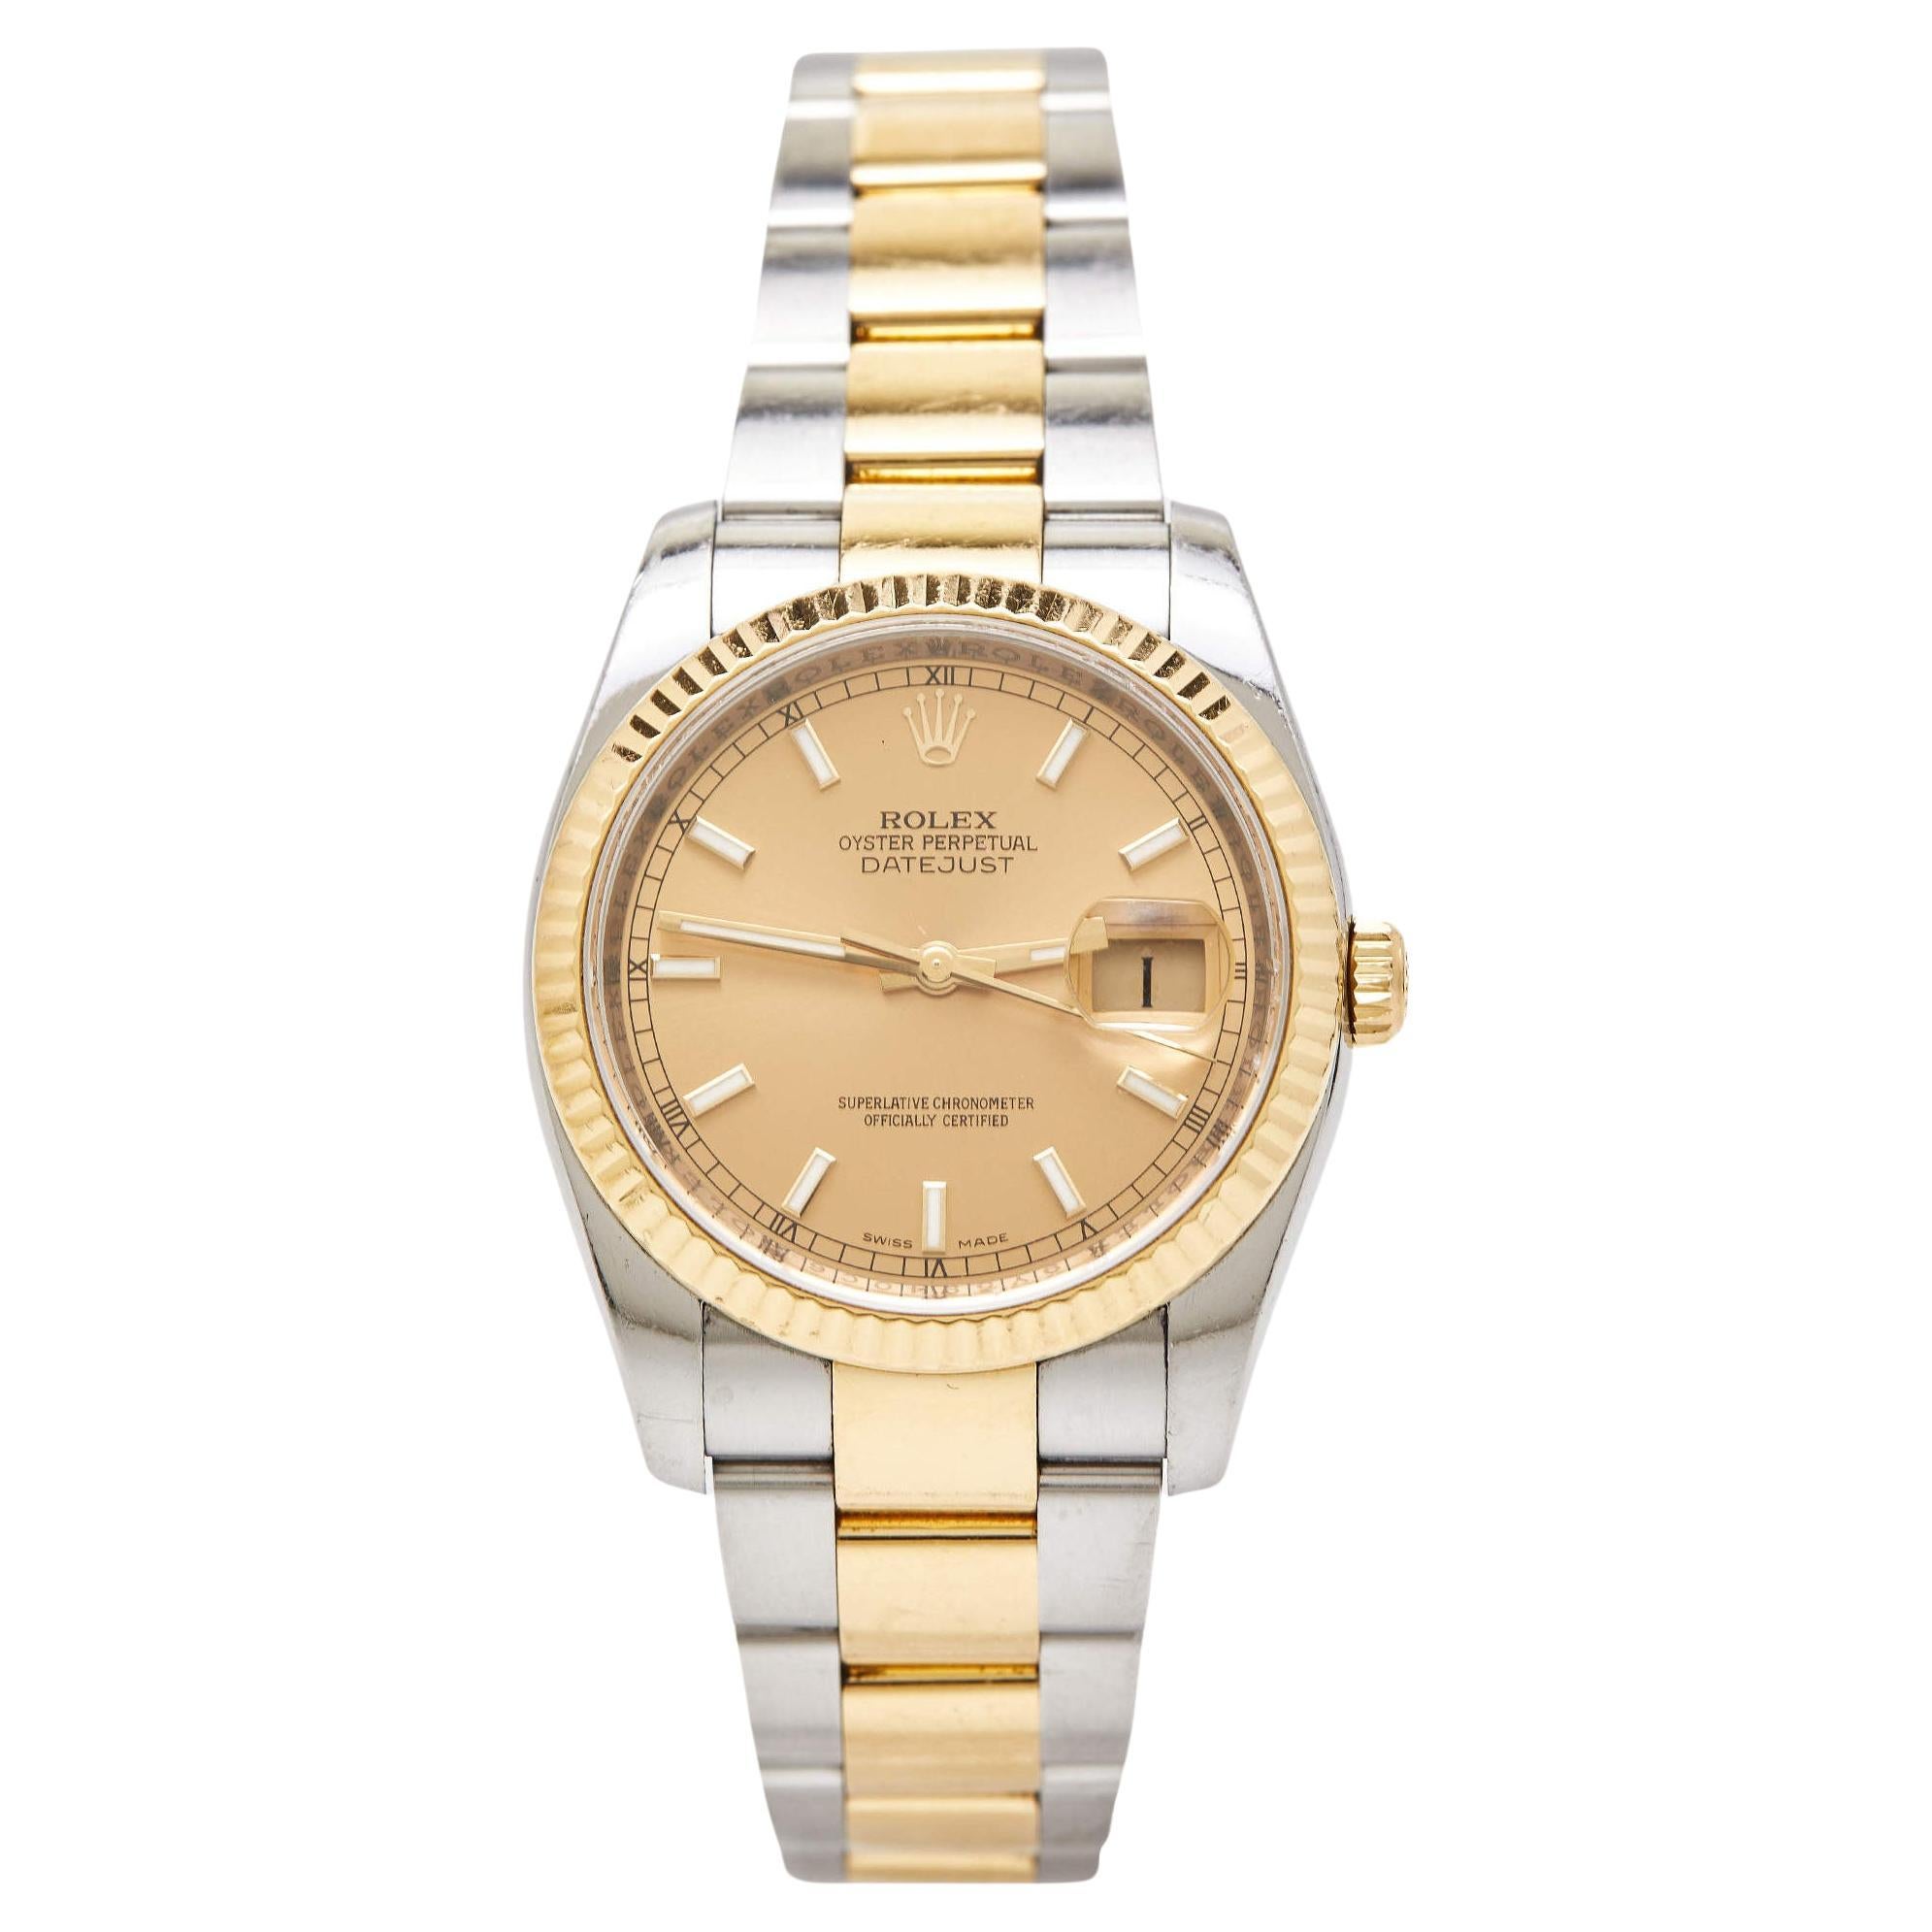 Rolex Champagne 18K Yellow Gold Stainless Steel Oyster Perpetual Datejust 116233